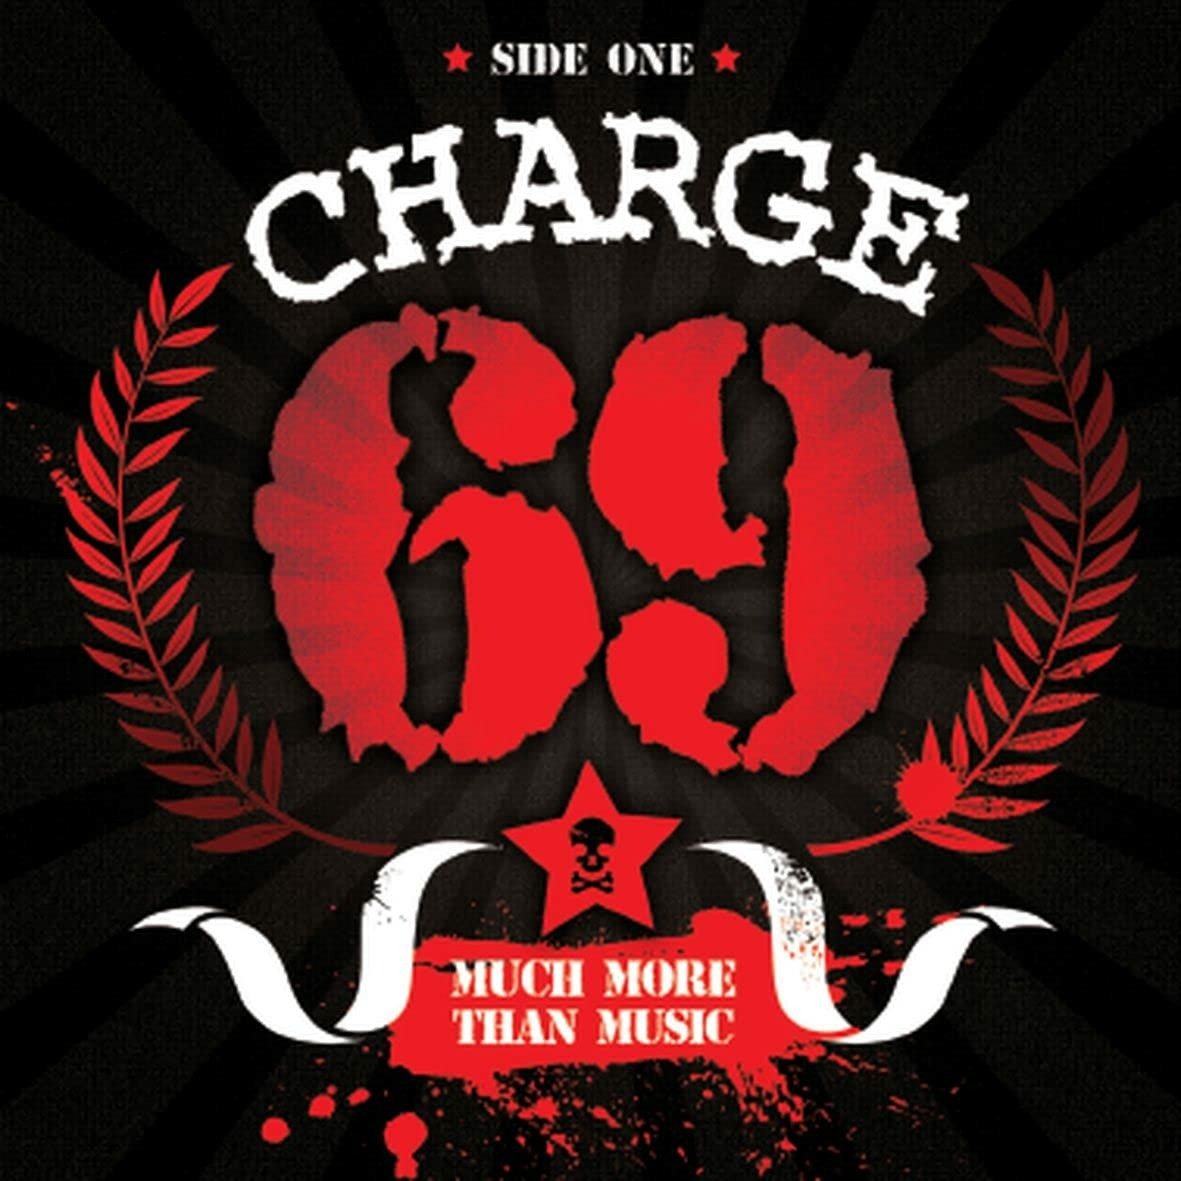 CD Shop - CHARGE 69 MUCH MORE THAN MUSIC